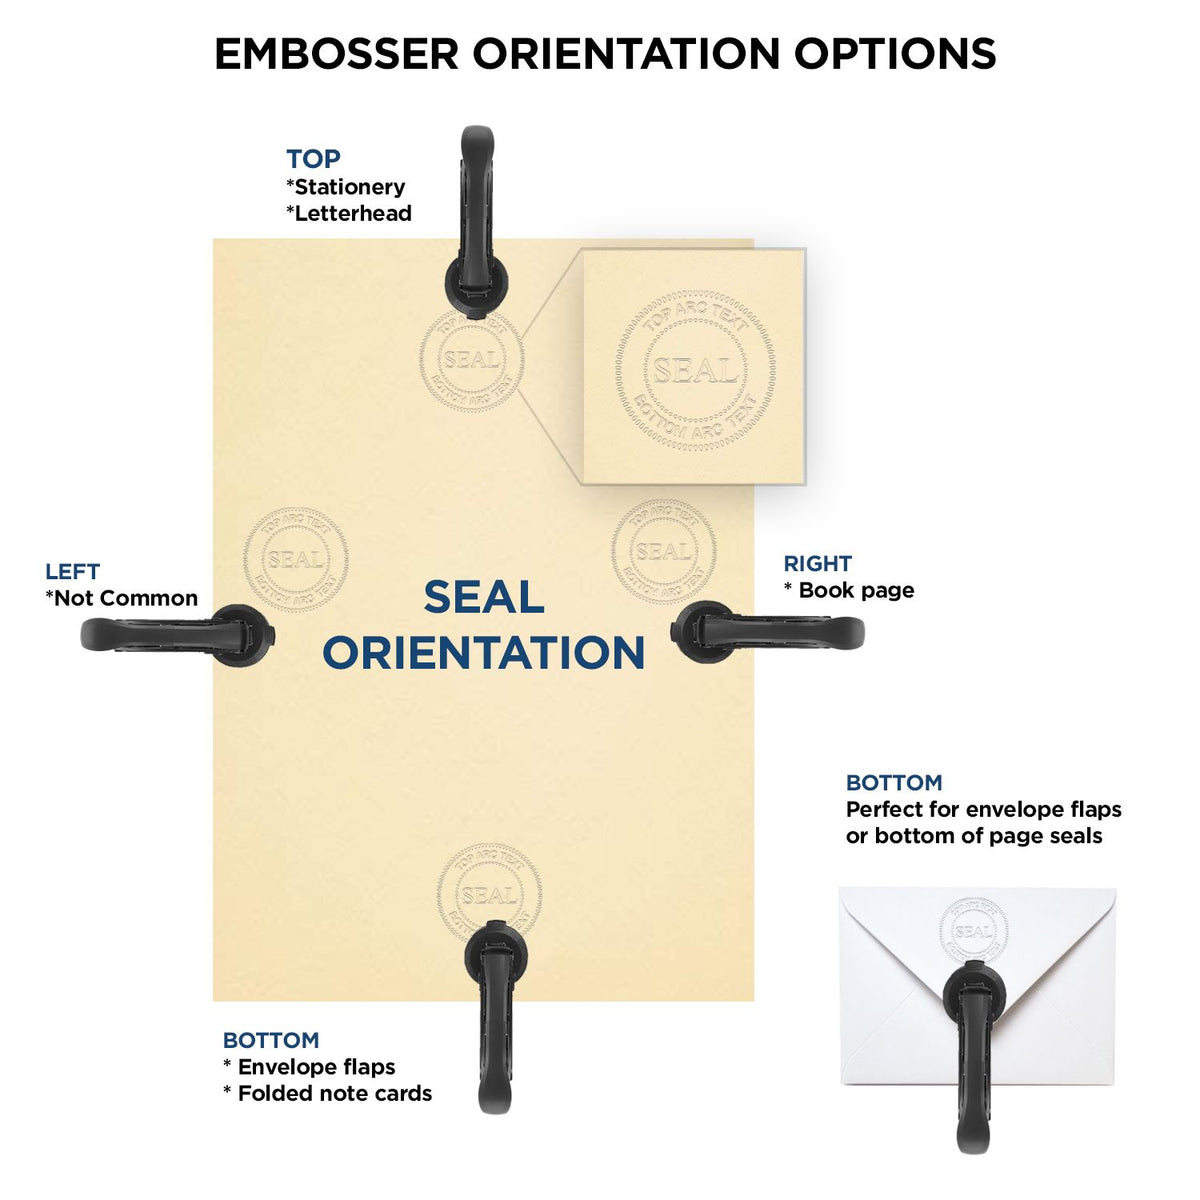 An infographic for the Florida Desk Surveyor Seal Embosser showing embosser orientation, this is showing examples of a top, bottom, right and left insert.